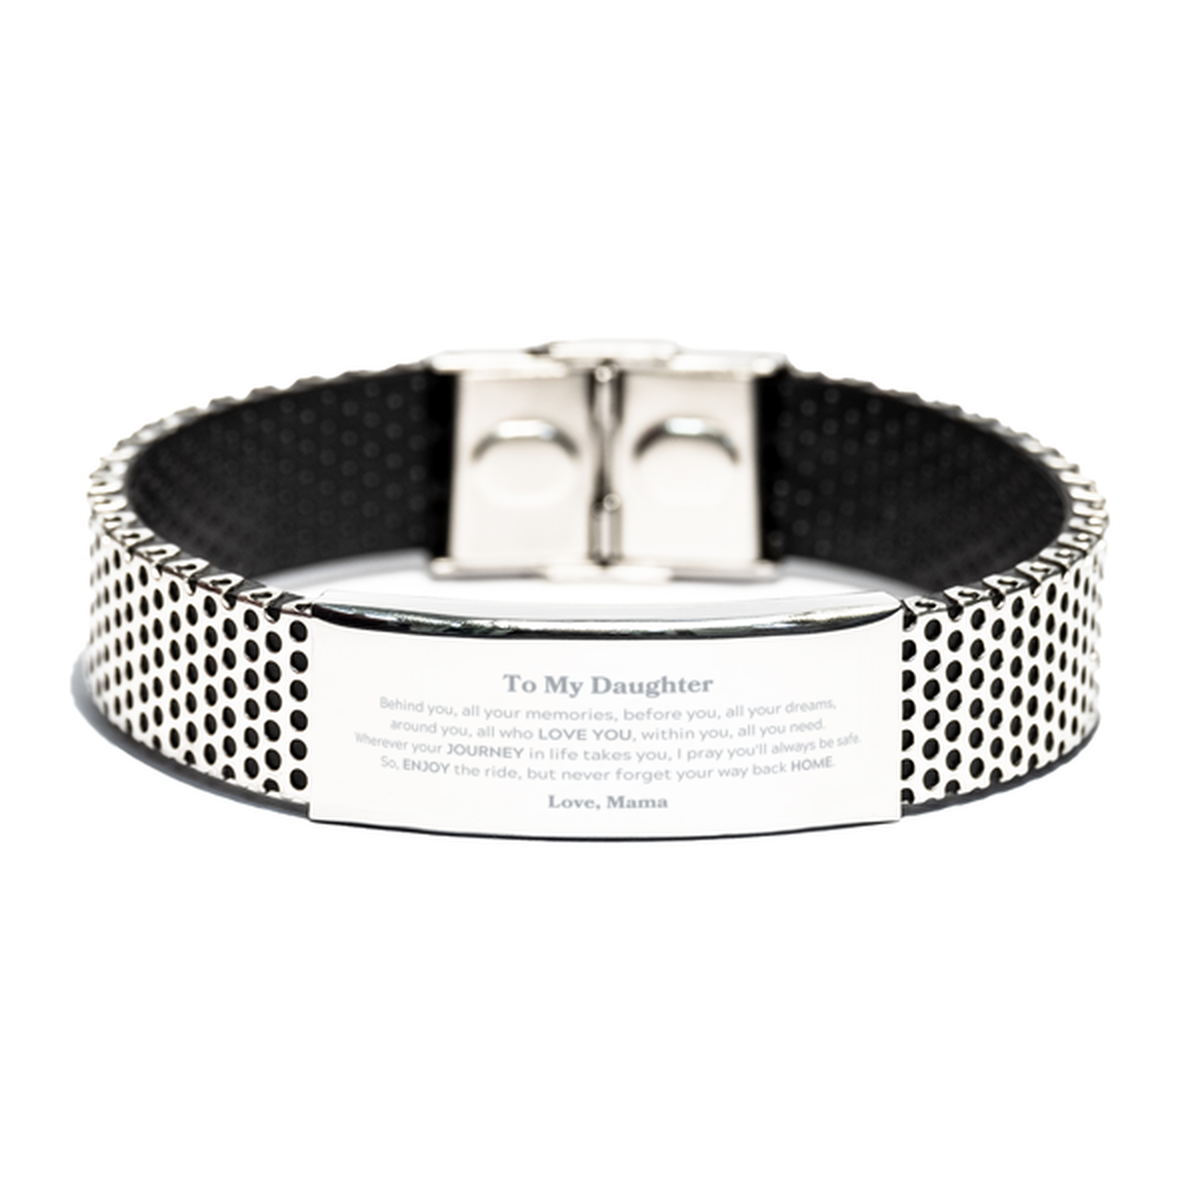 To My Daughter Graduation Gifts from Mama, Daughter Stainless Steel Bracelet Christmas Birthday Gifts for Daughter Behind you, all your memories, before you, all your dreams. Love, Mama